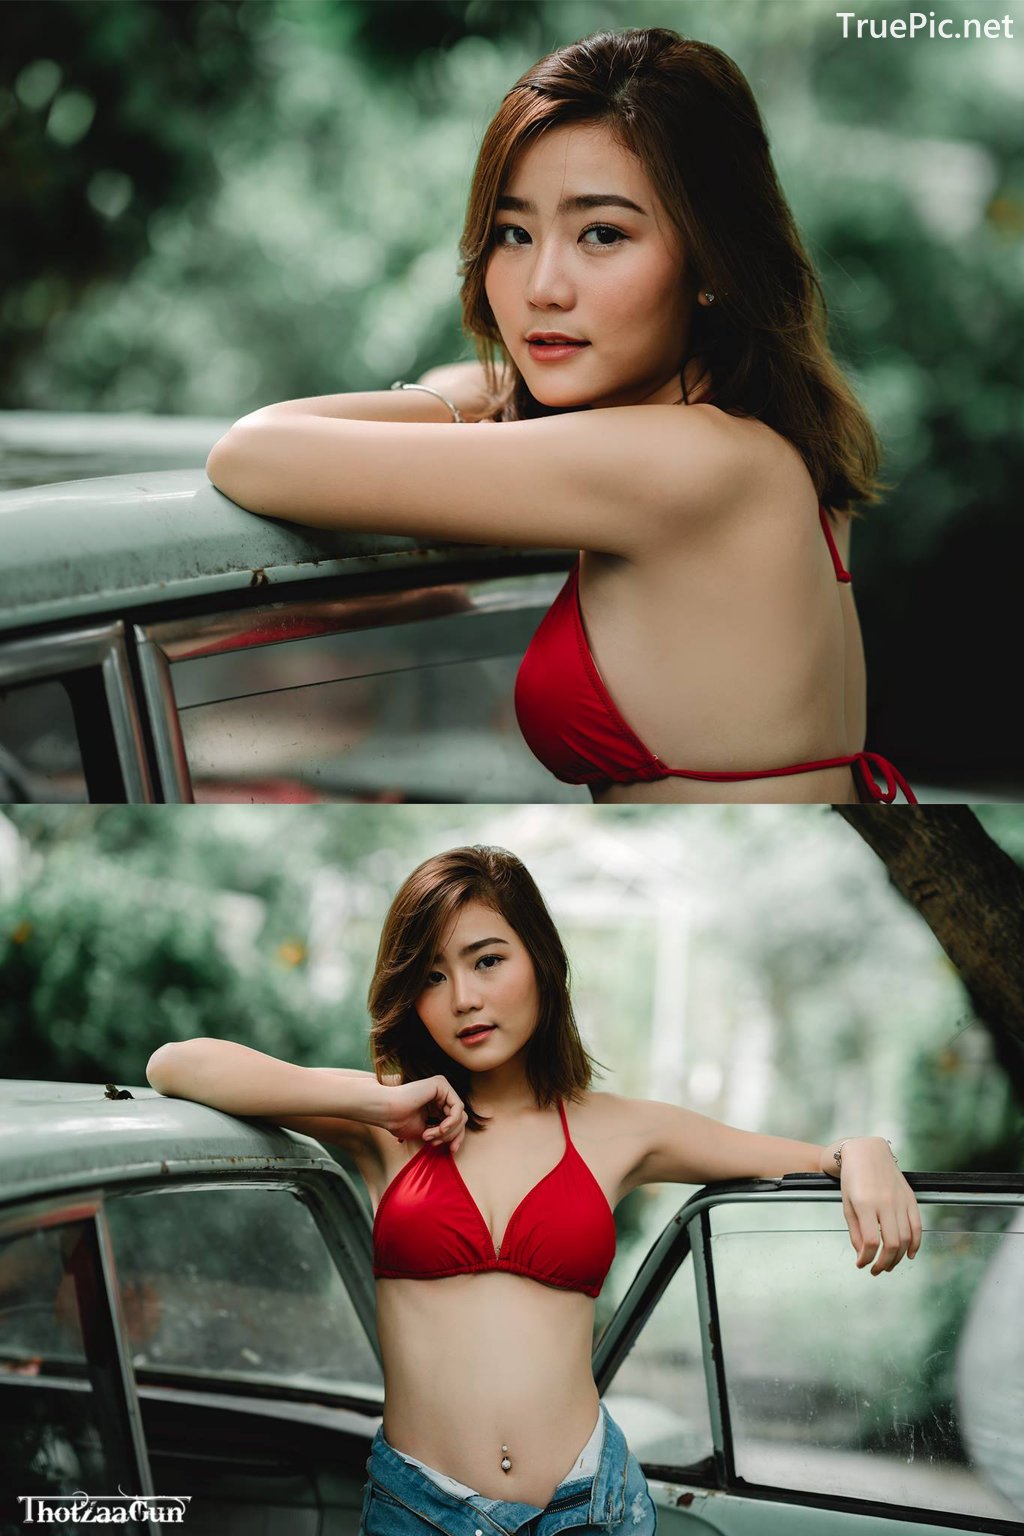 Image Thailand Model - Pattaravadee Boonmeesup - Red Bikini Top and Jean - TruePic.net - Picture-9